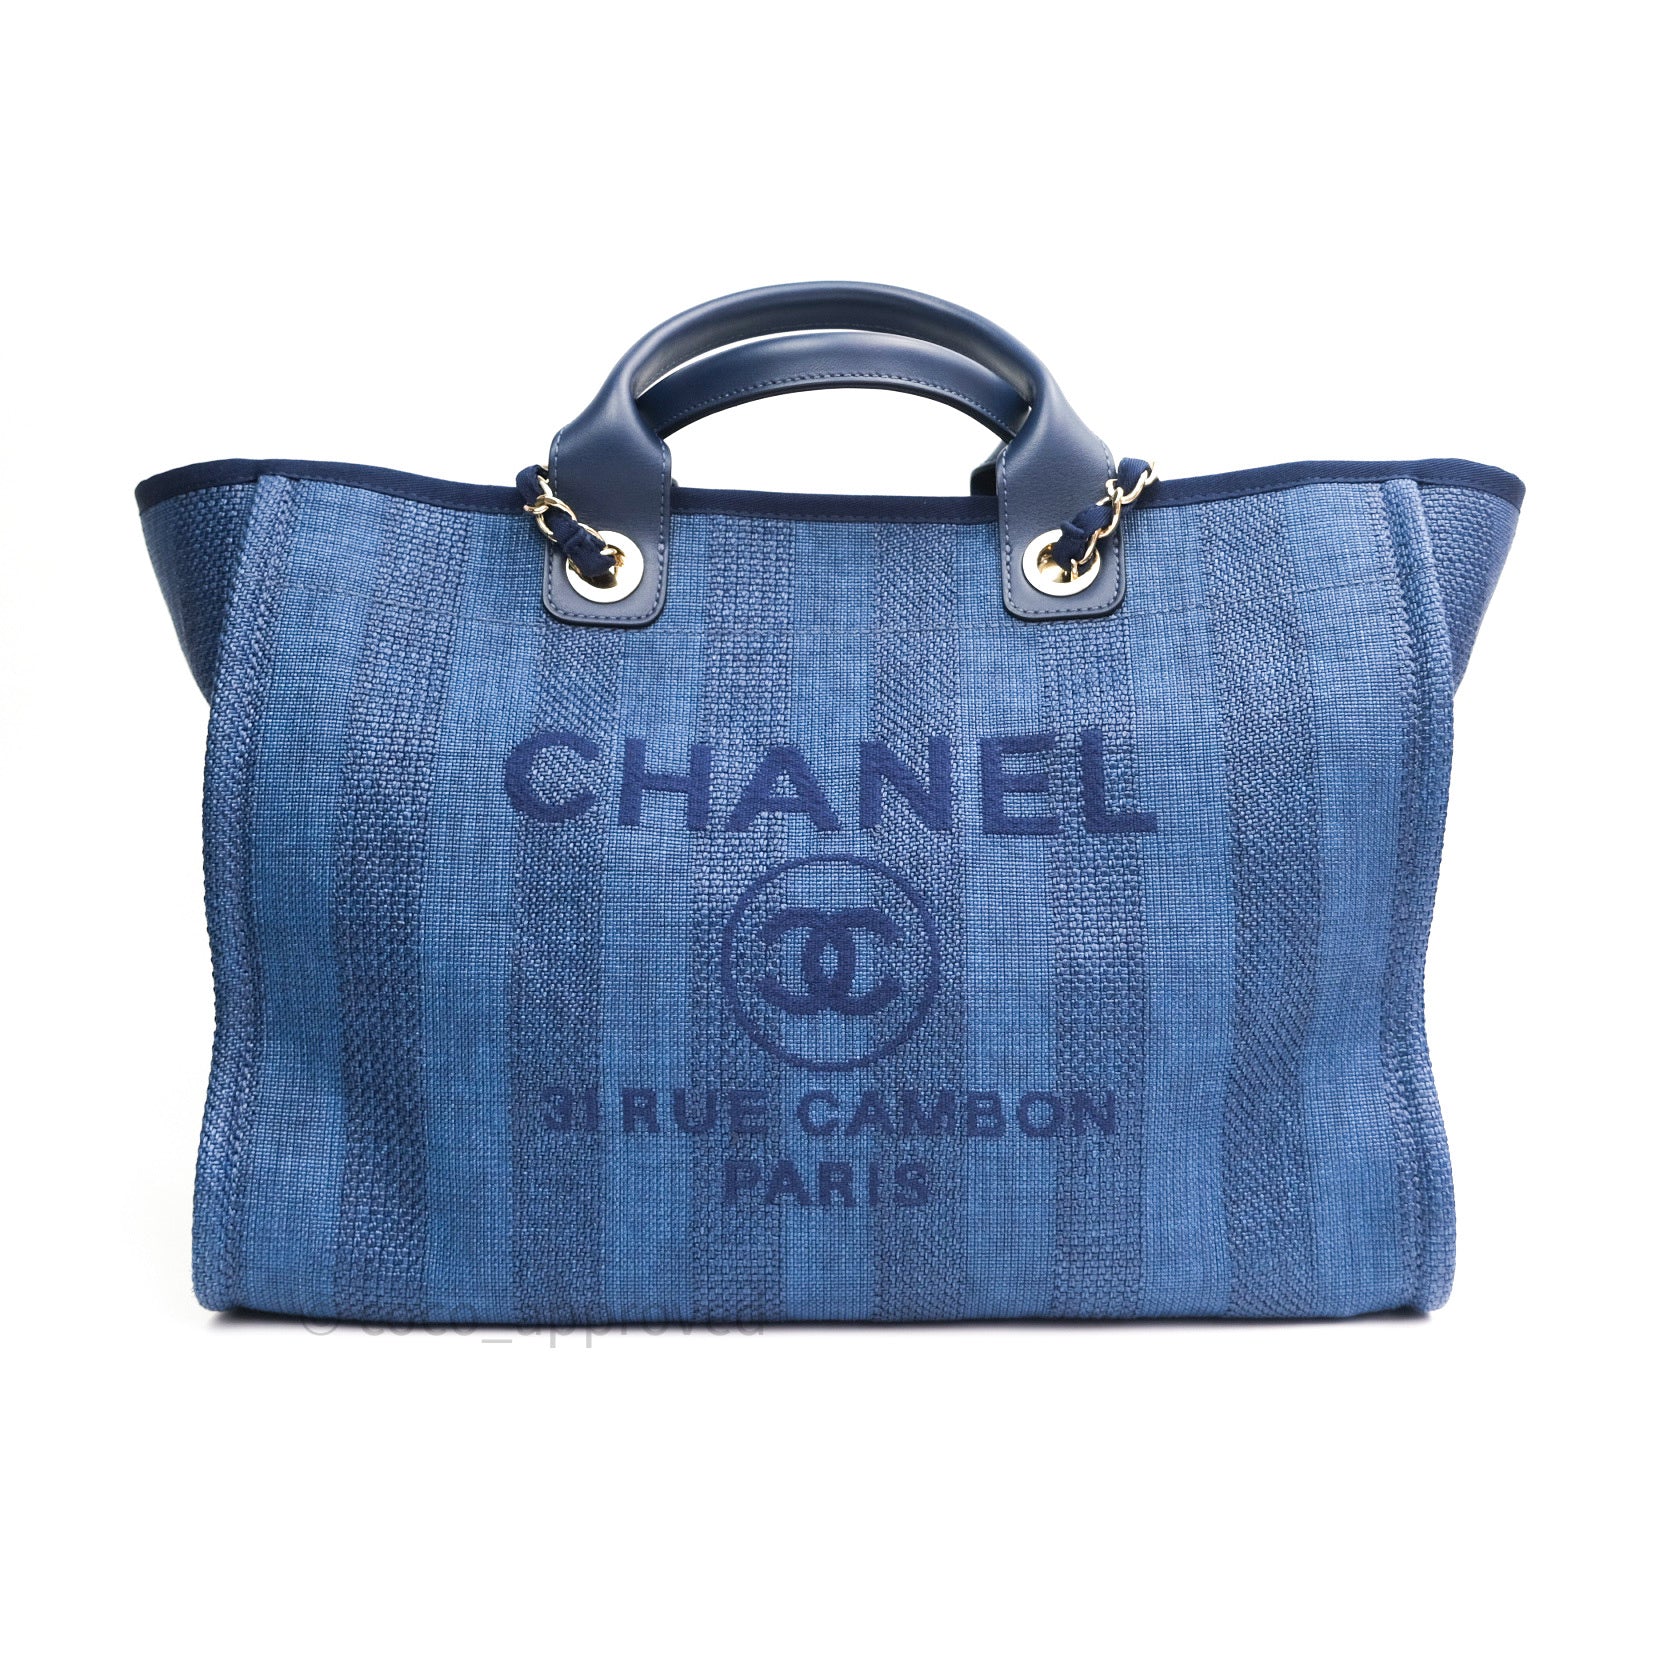 CHANEL Deauville line Tote Bag Canvas 2way Navy CC Auth bs3641